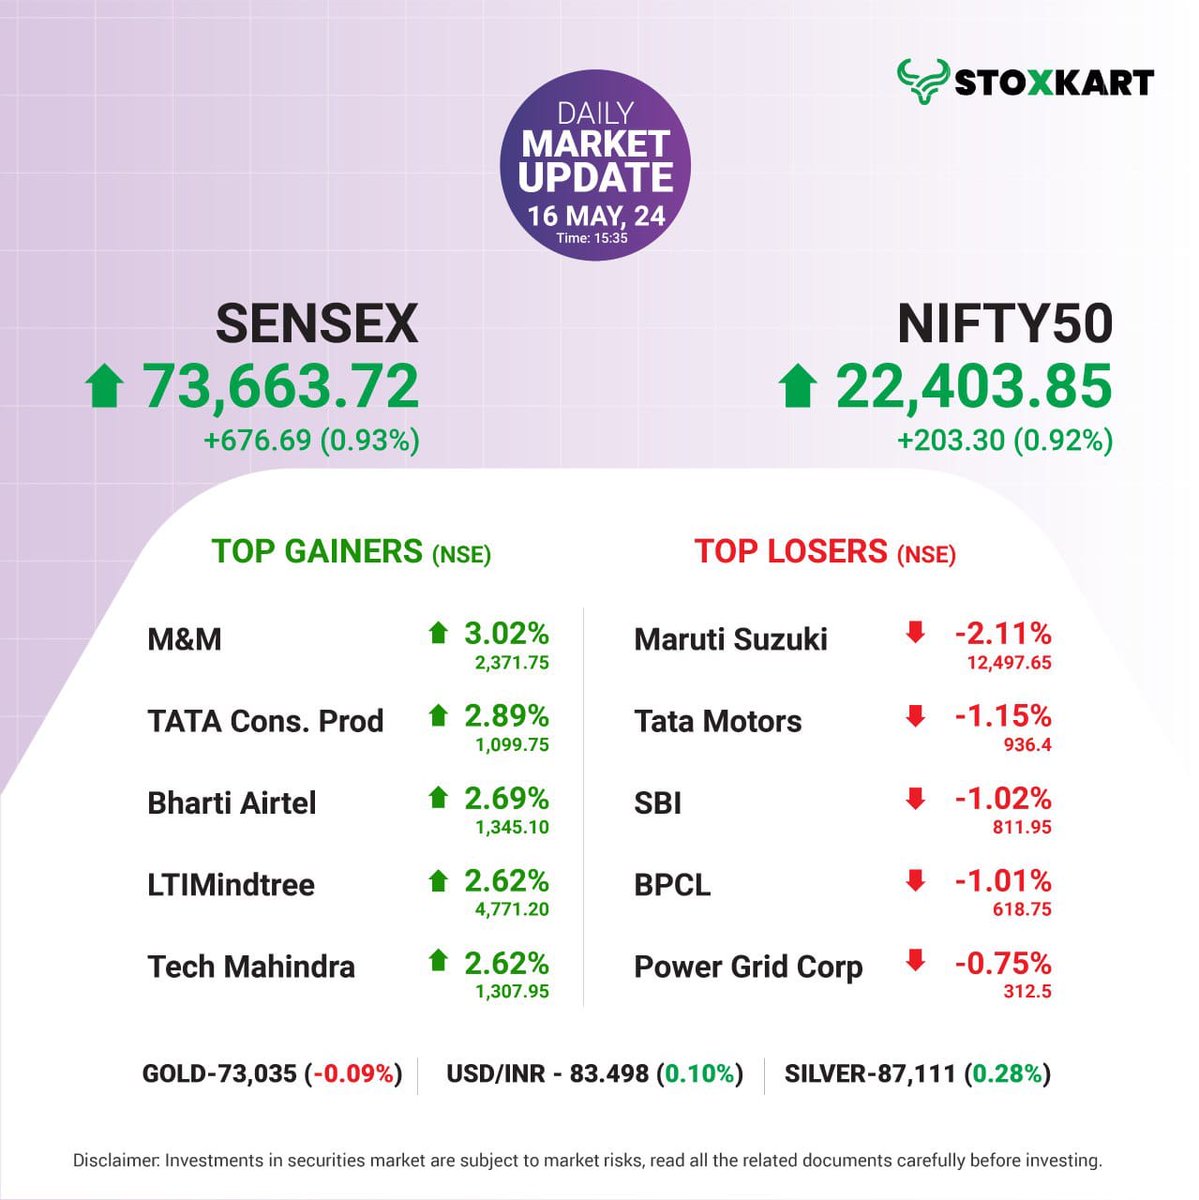 #dailymarketupdate
Here's a recap of today's market performance, focusing on the Nifty 50 index's top 5 gainers and top 5 losers. Have you invested in any of these stocks? Share your thoughts in the comments section!

#stoxkart #stoxkartapp #tradewithstoxkart